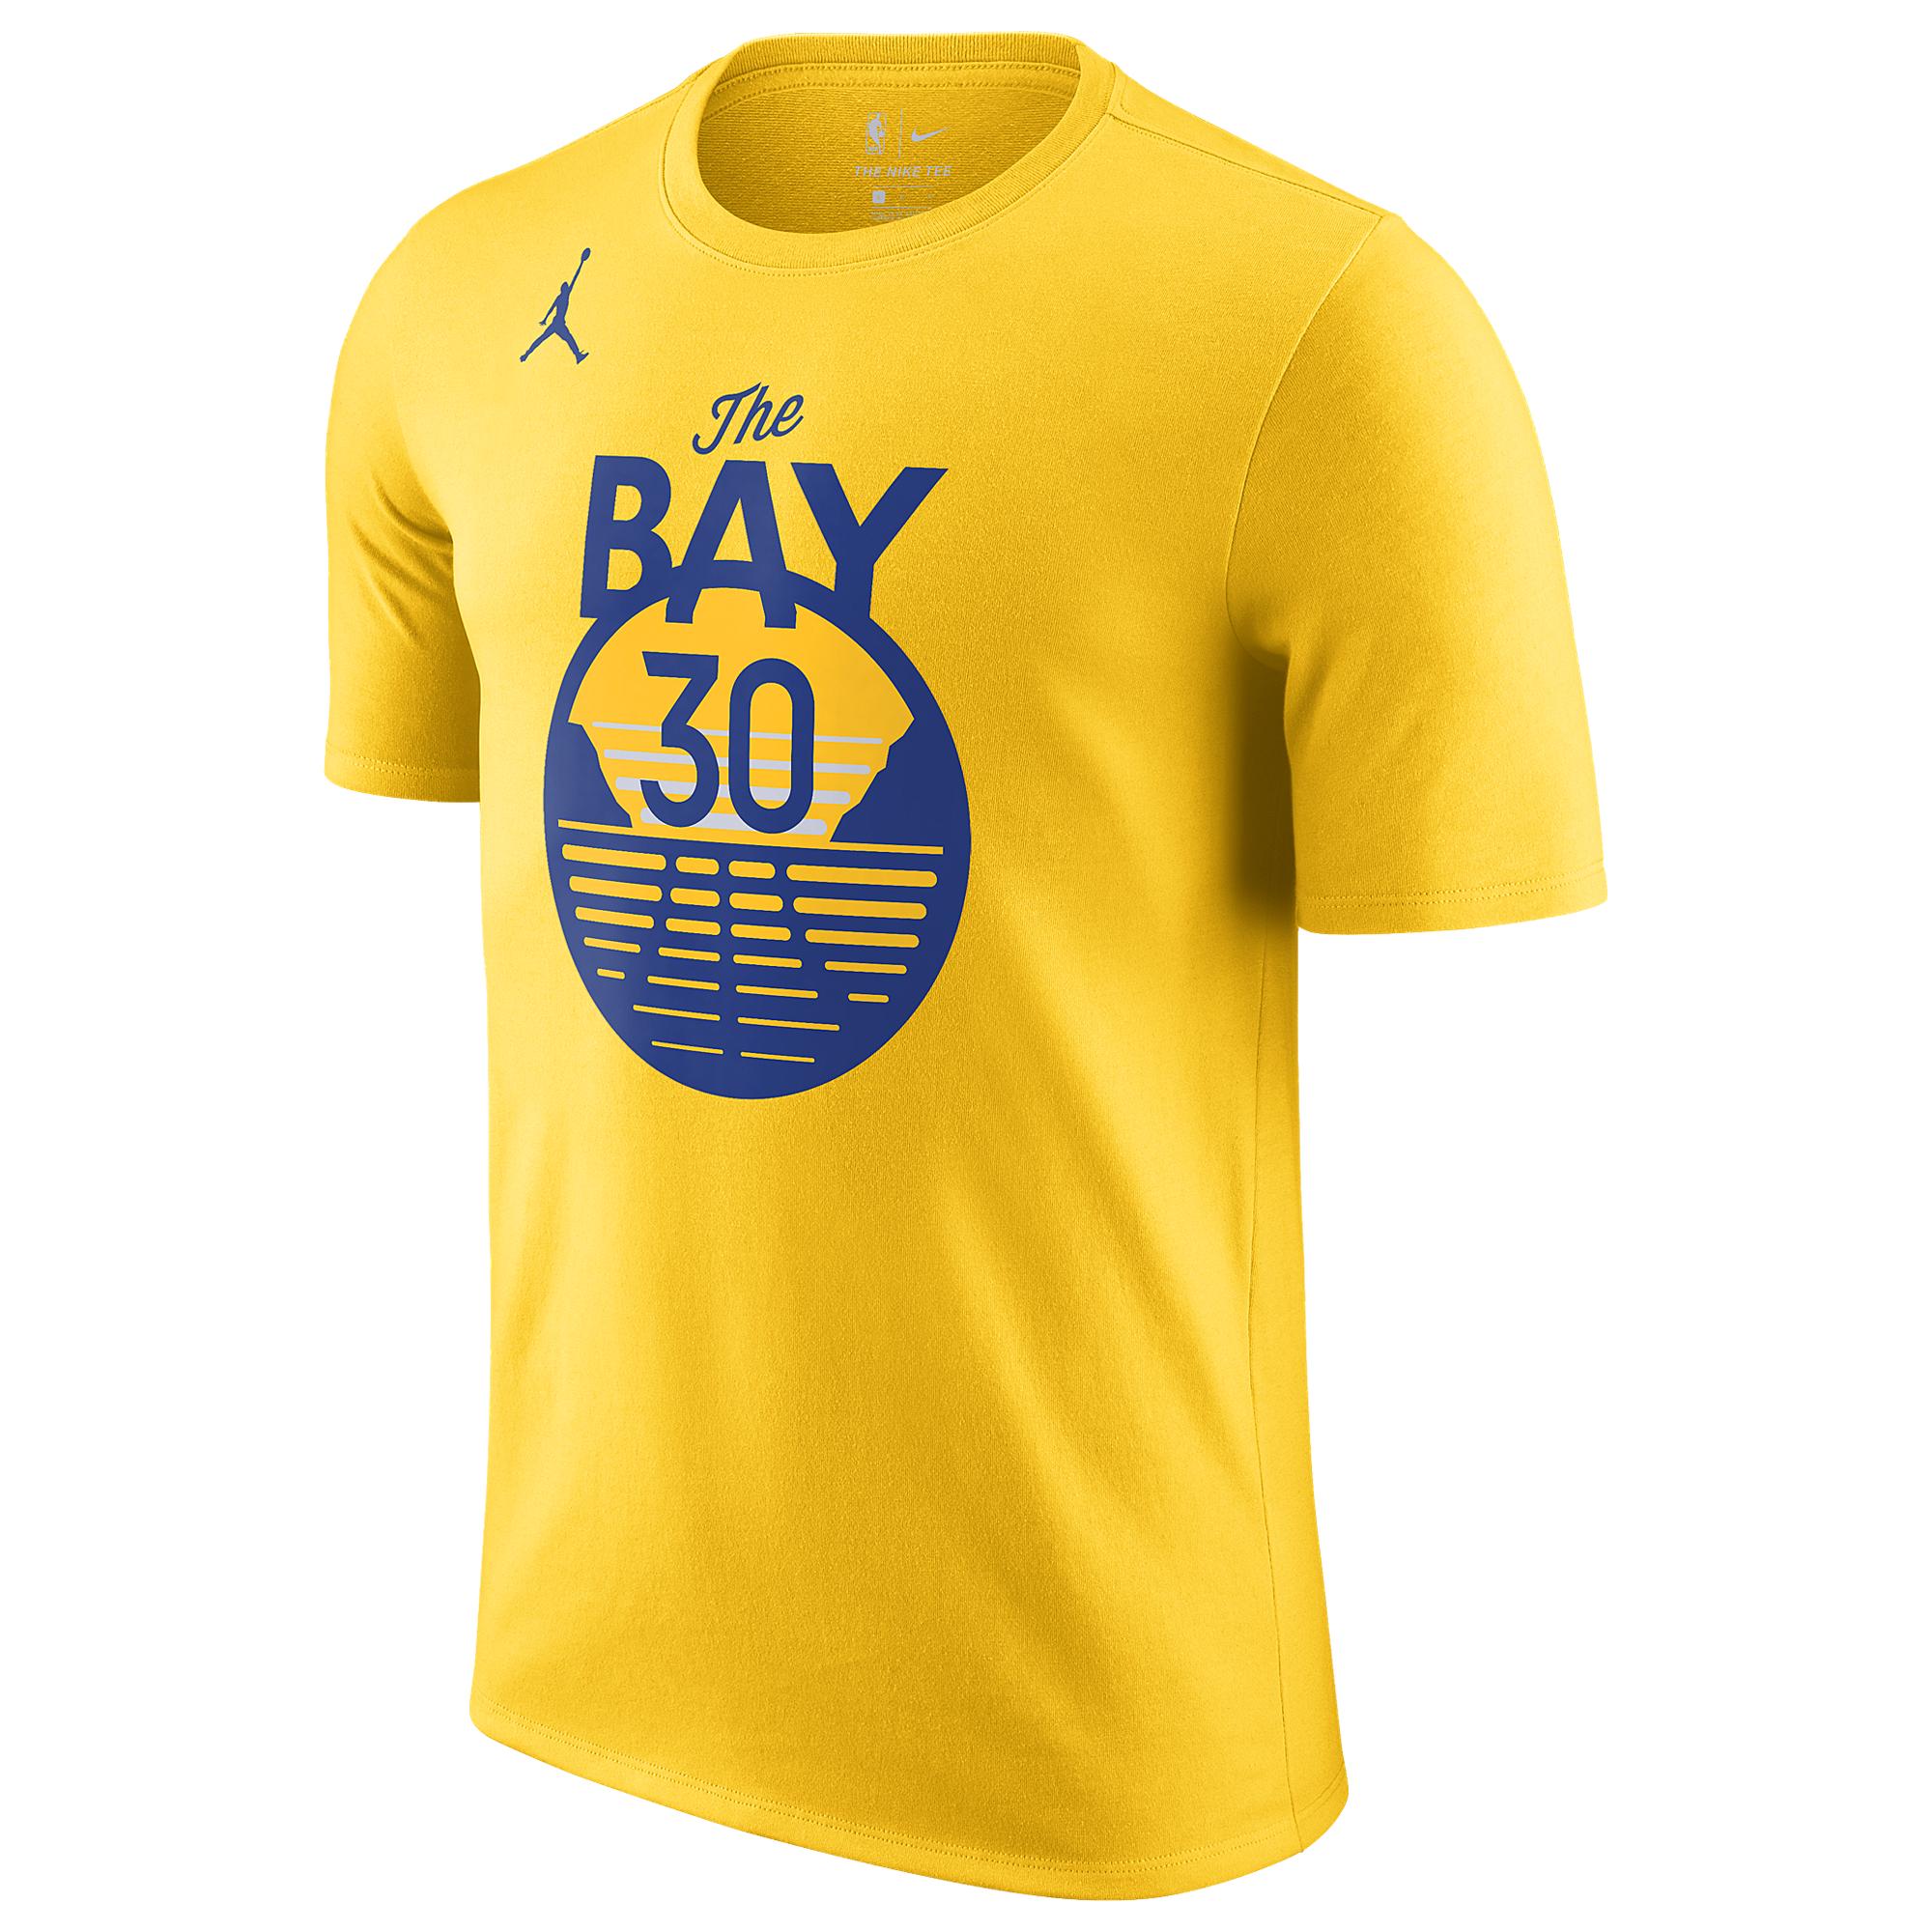 Nike Cotton Stephen Curry Nba Statement Edition Player T-shirt in ...